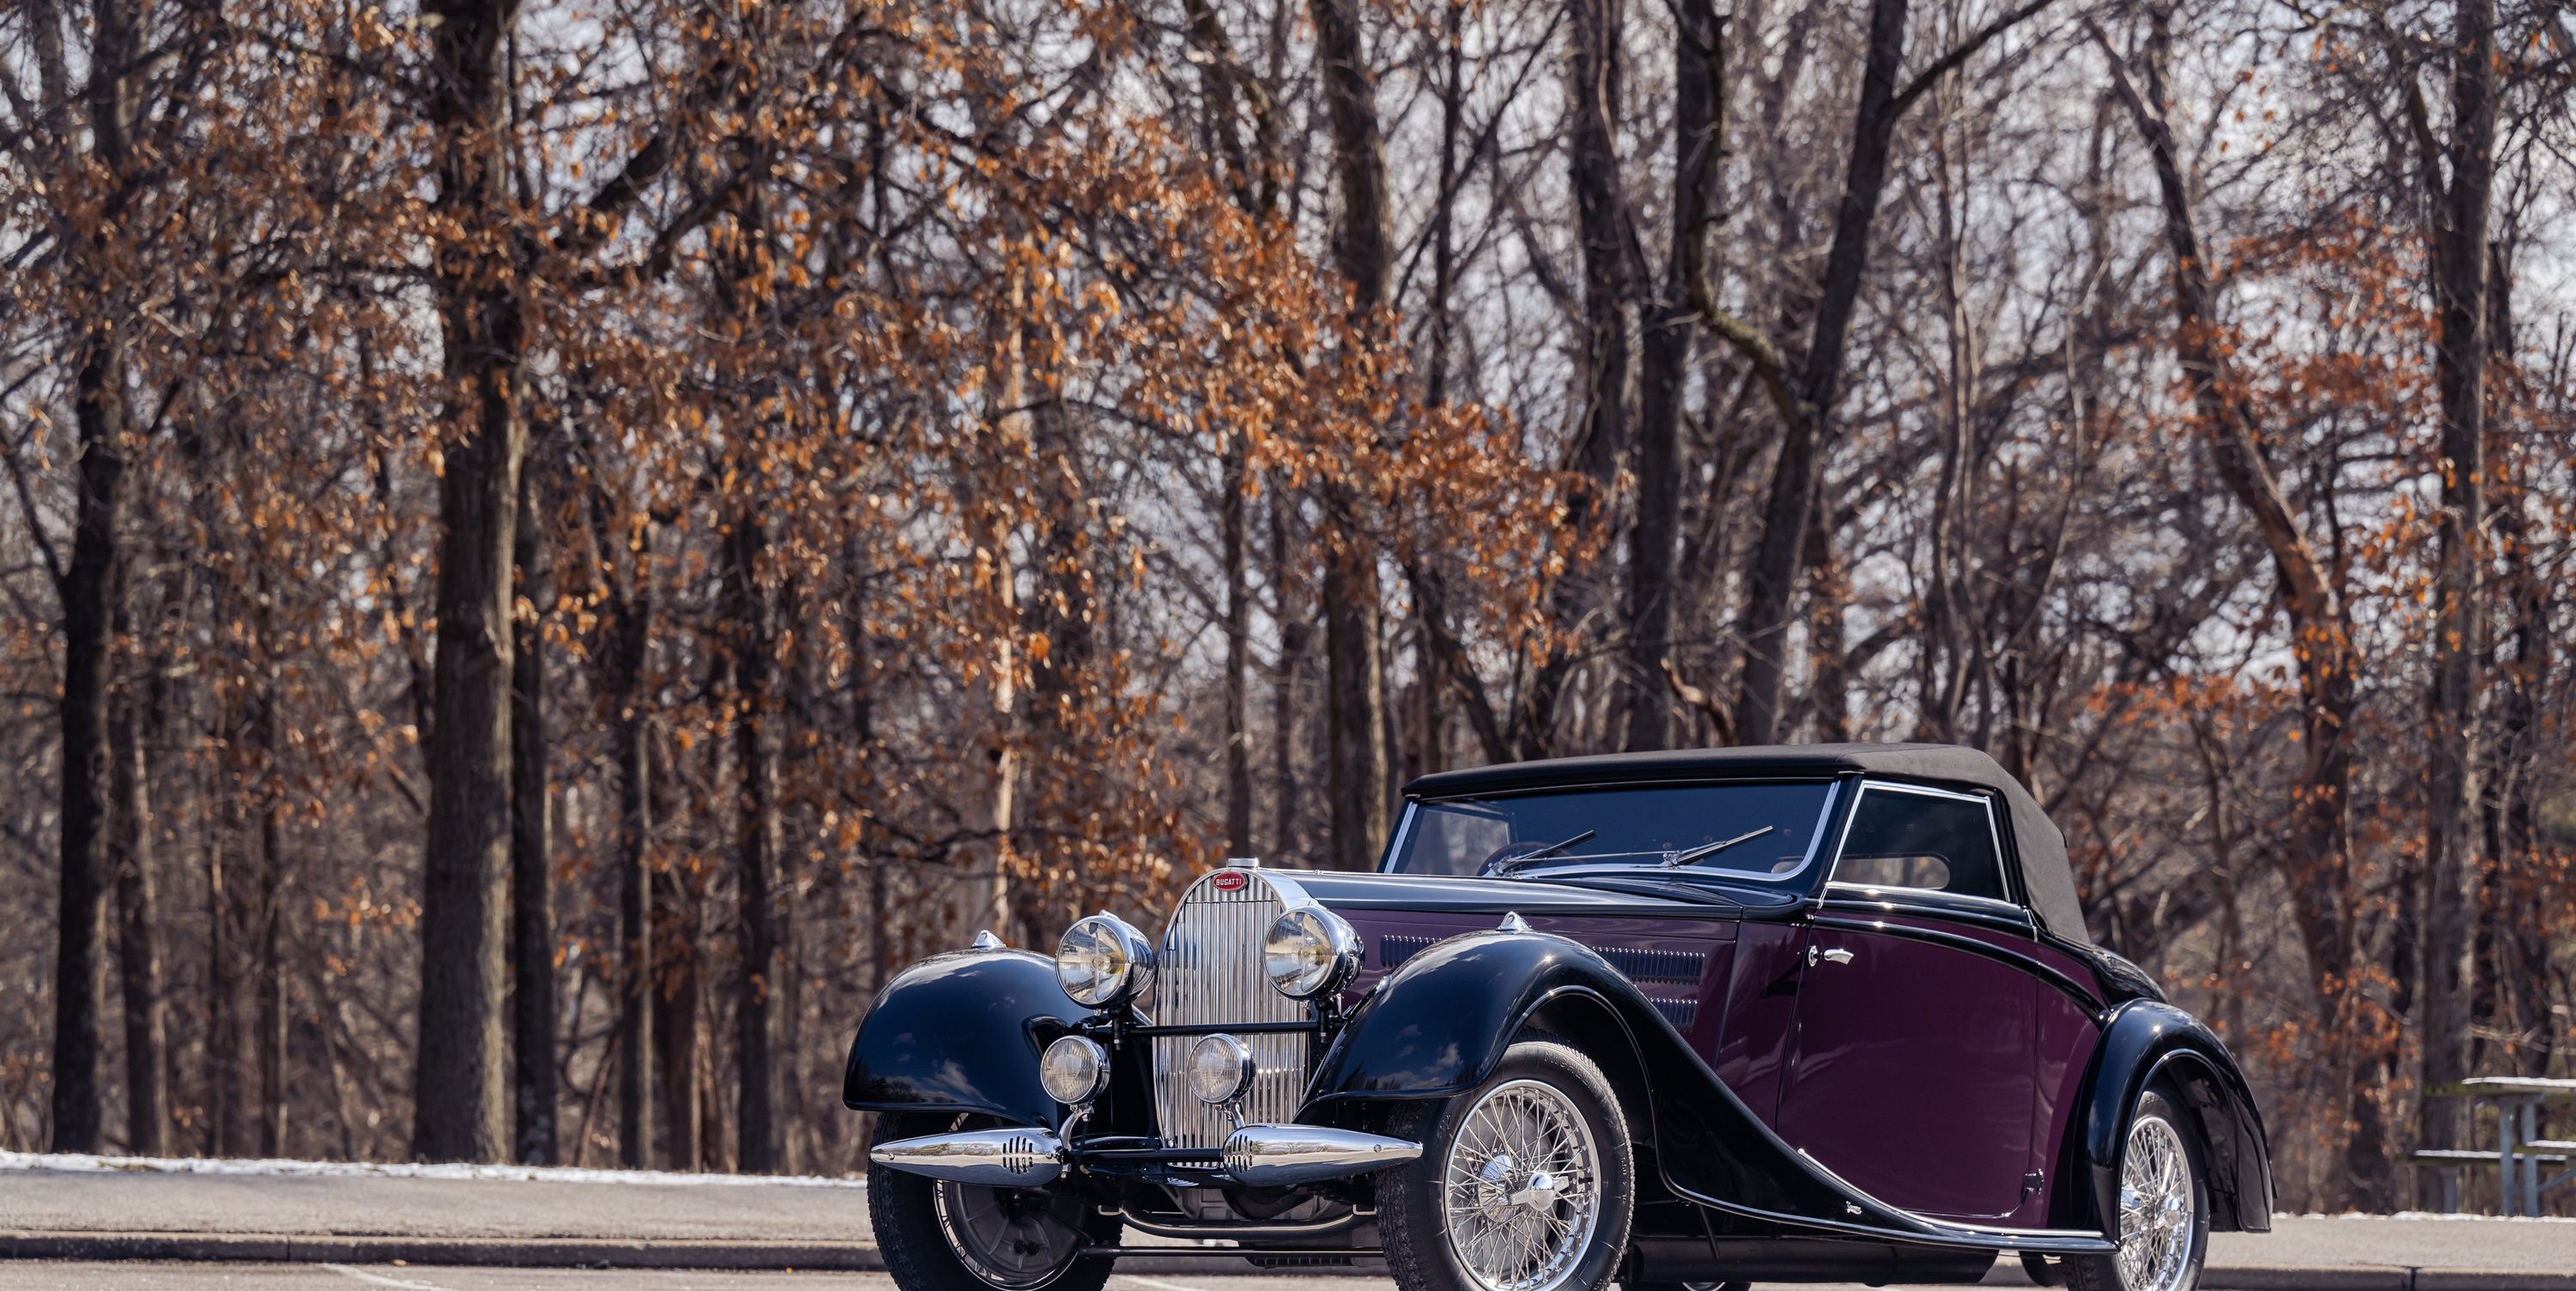 The Amelia 2023 Concours Has Something for Everybody